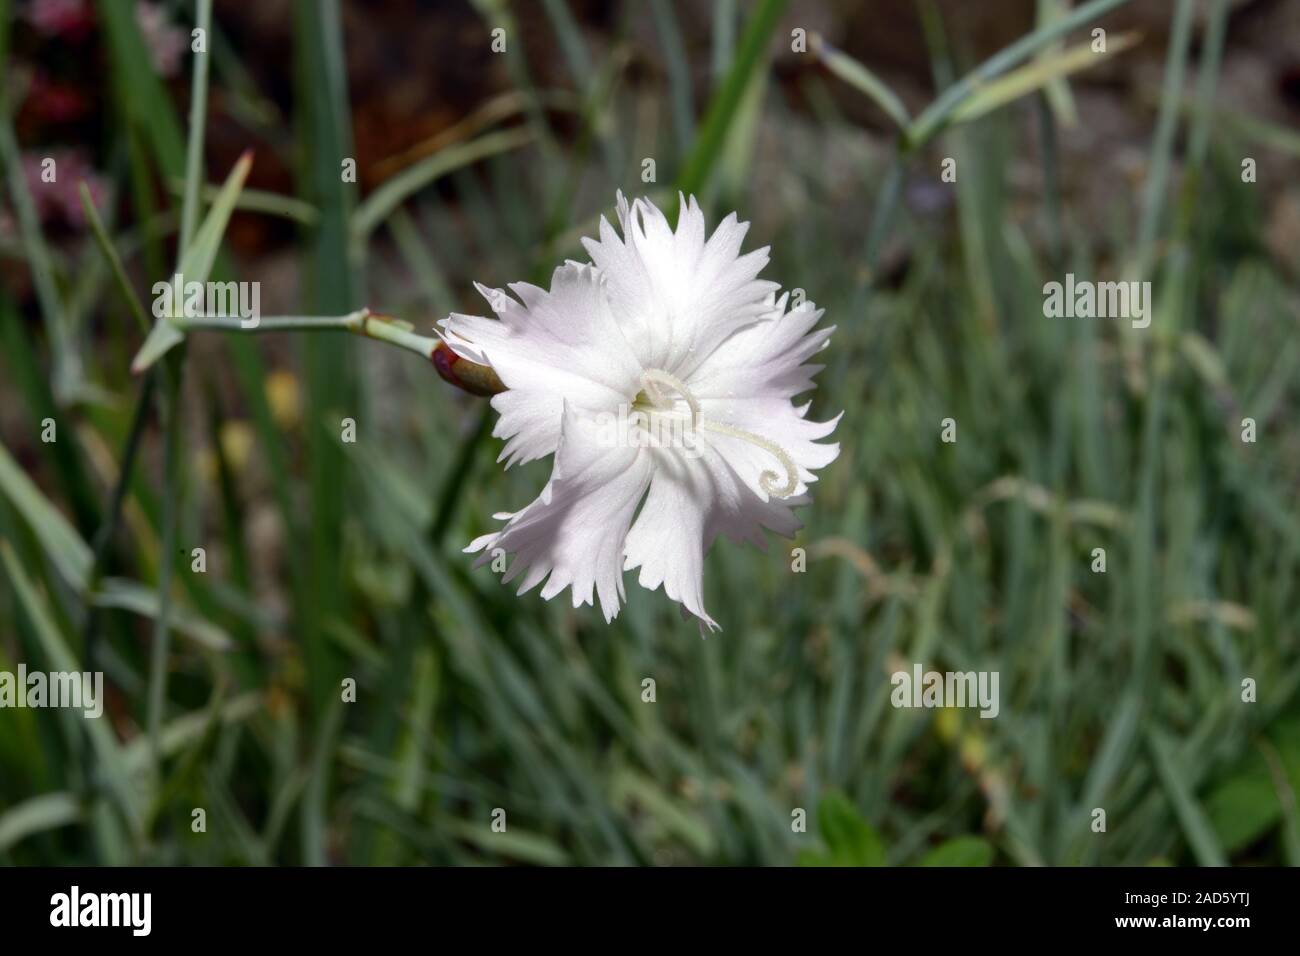 Dianthus turkestanicus, a member of the family Caryophyllaceae, is native to China and Kazakhstan. Stock Photo